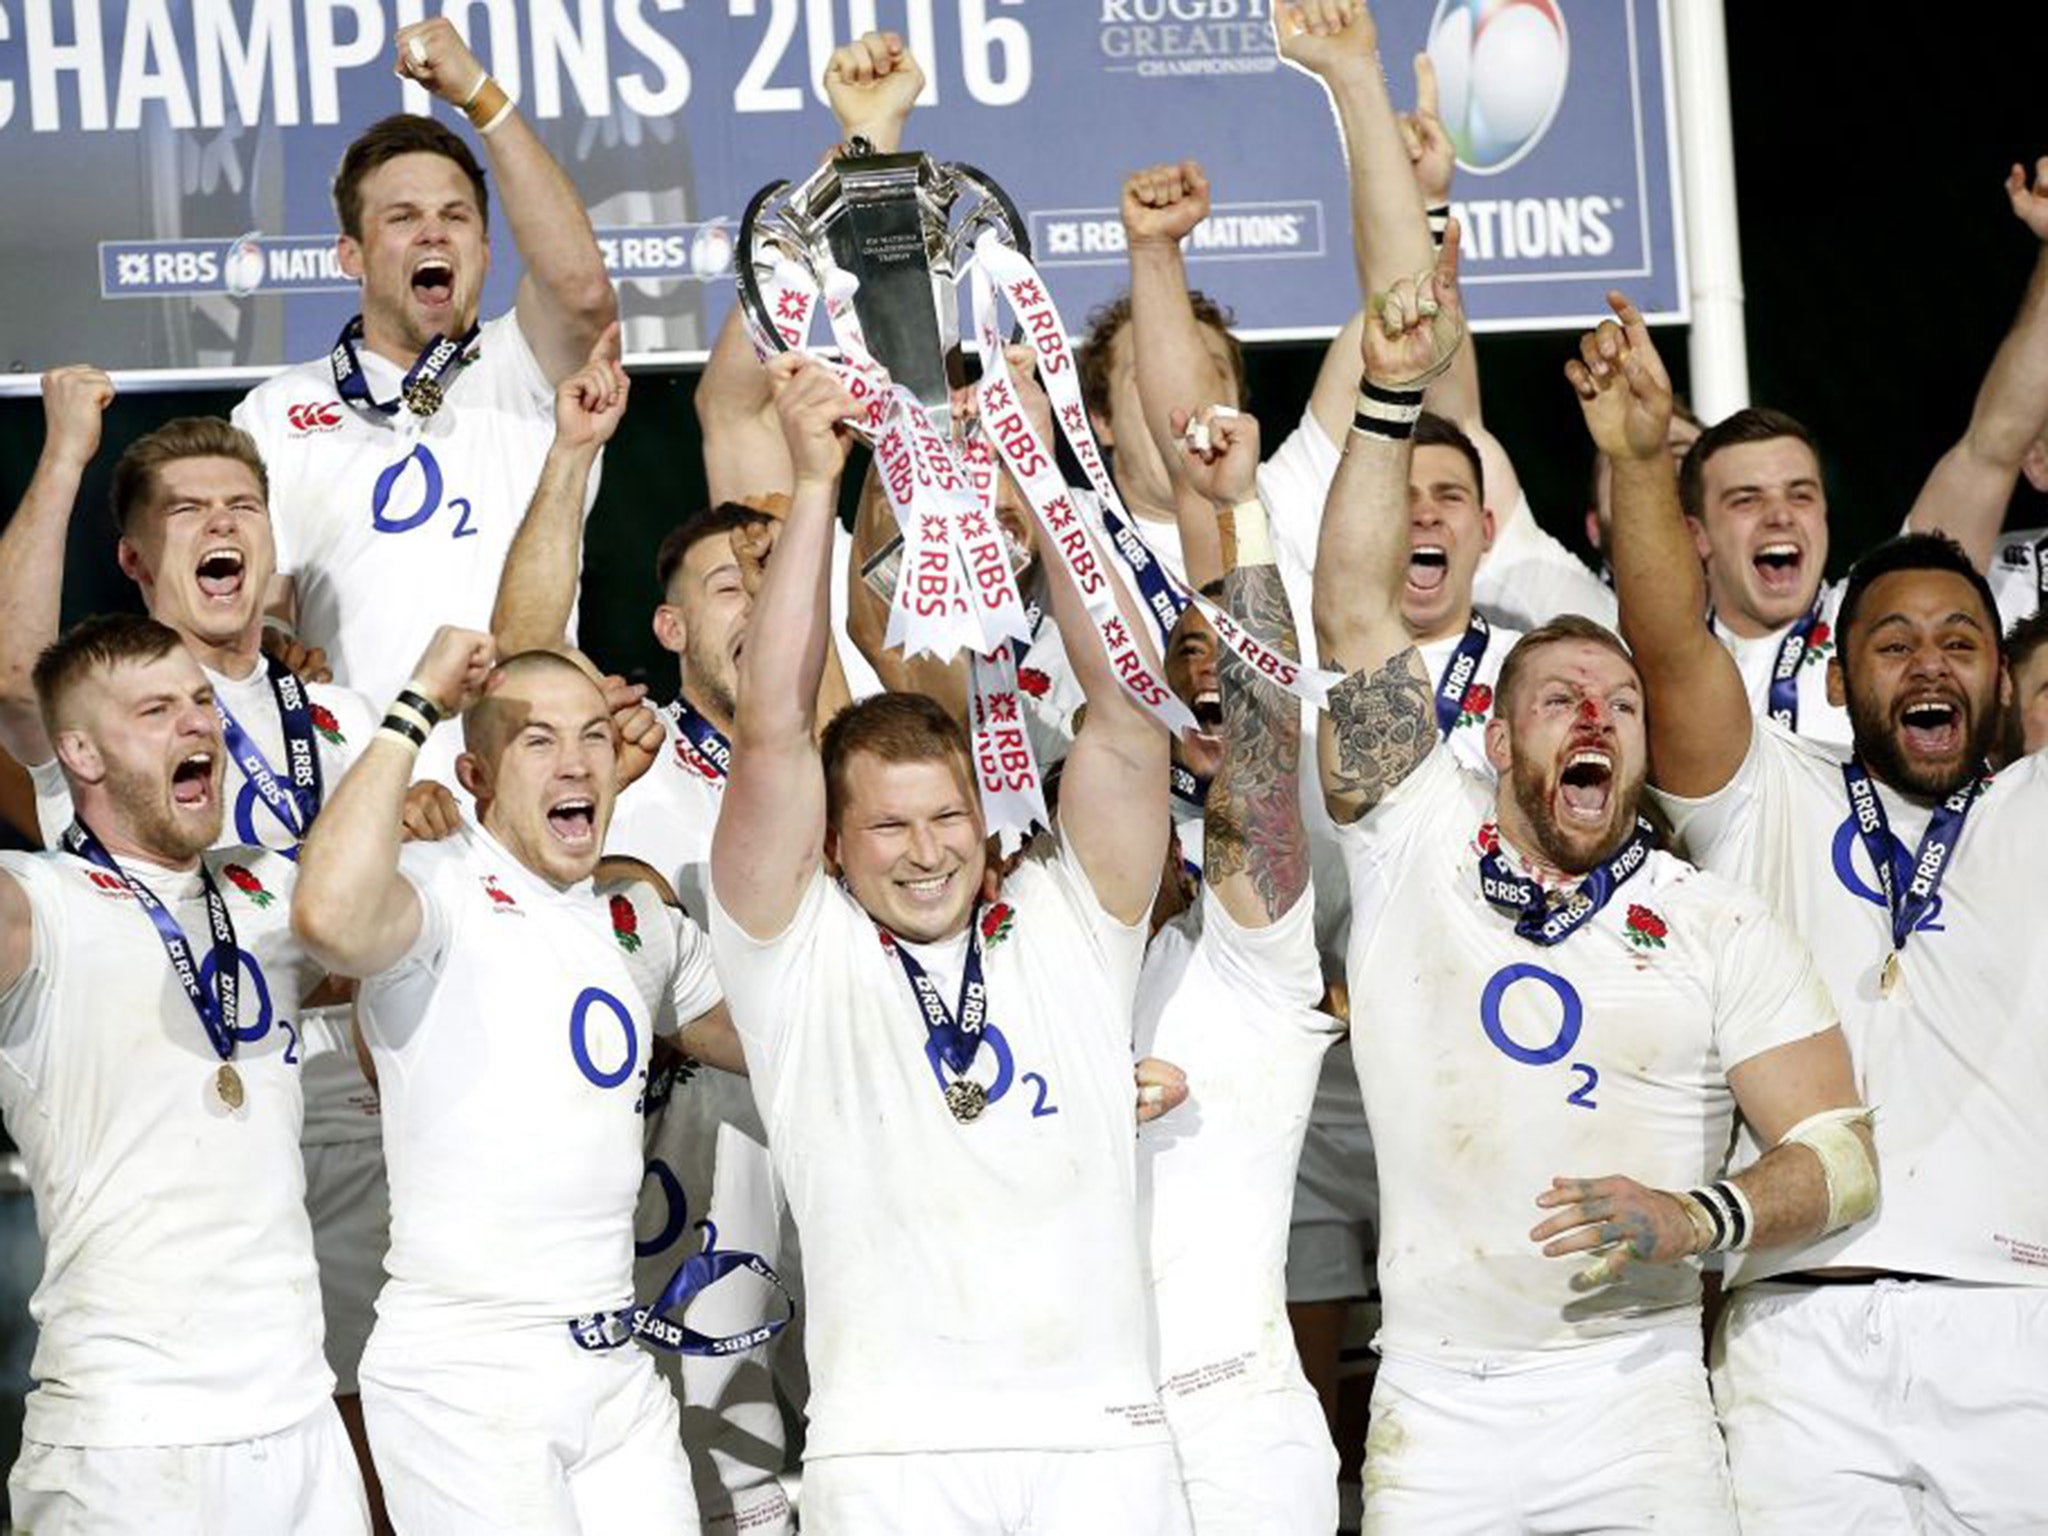 Dylan Hartley lifts the Six Nations trophy after England complete the Grand Slam